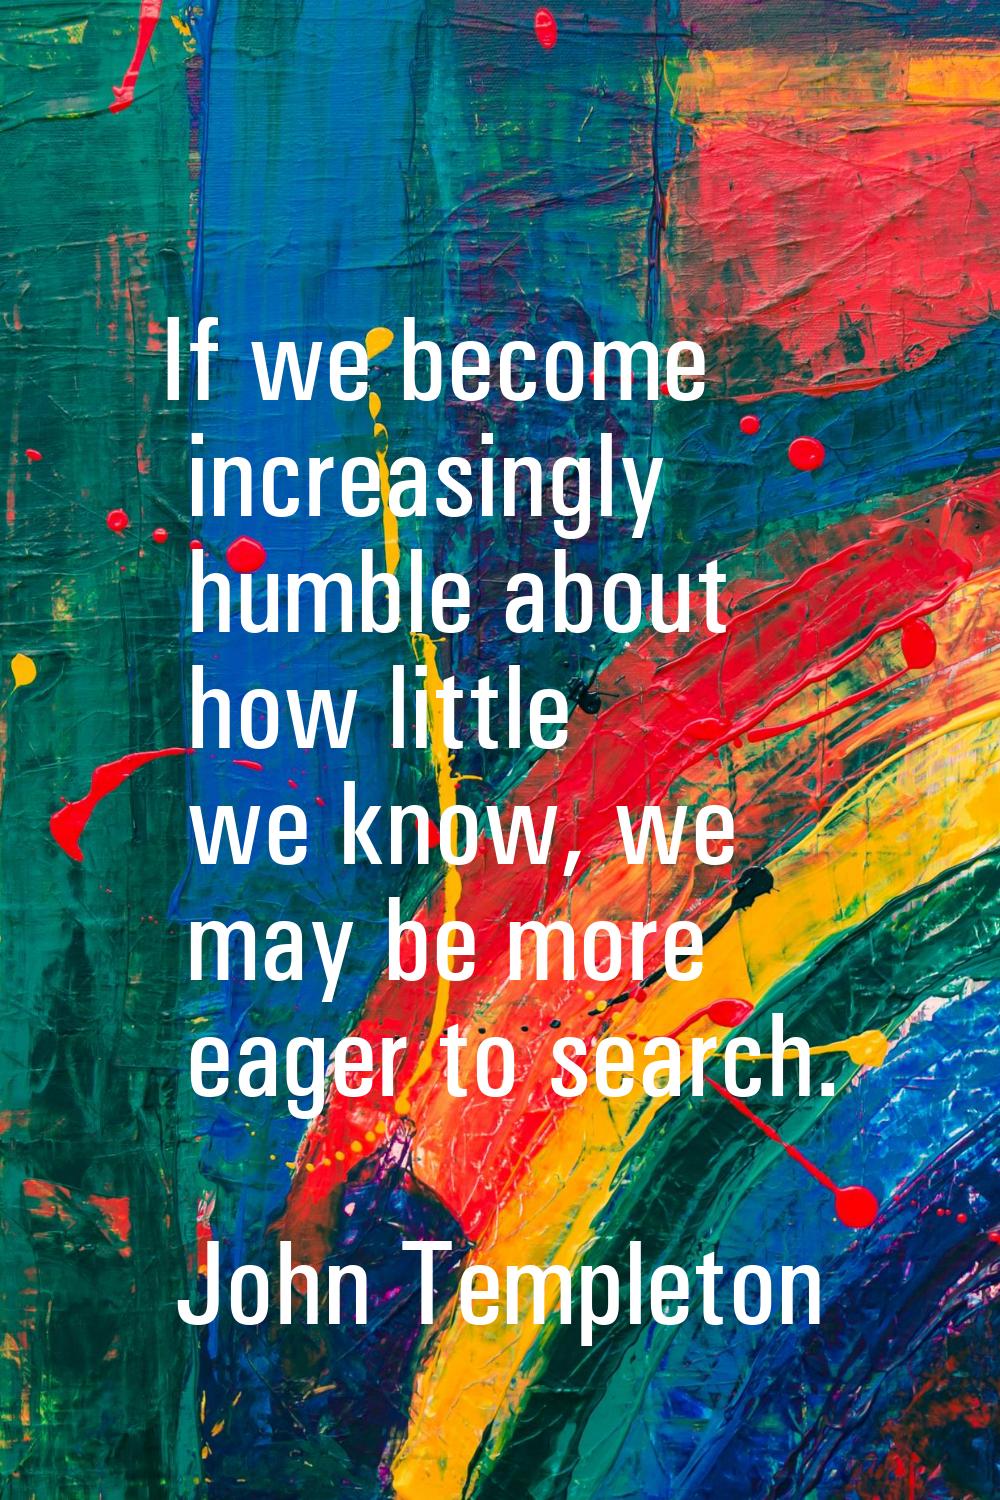 If we become increasingly humble about how little we know, we may be more eager to search.